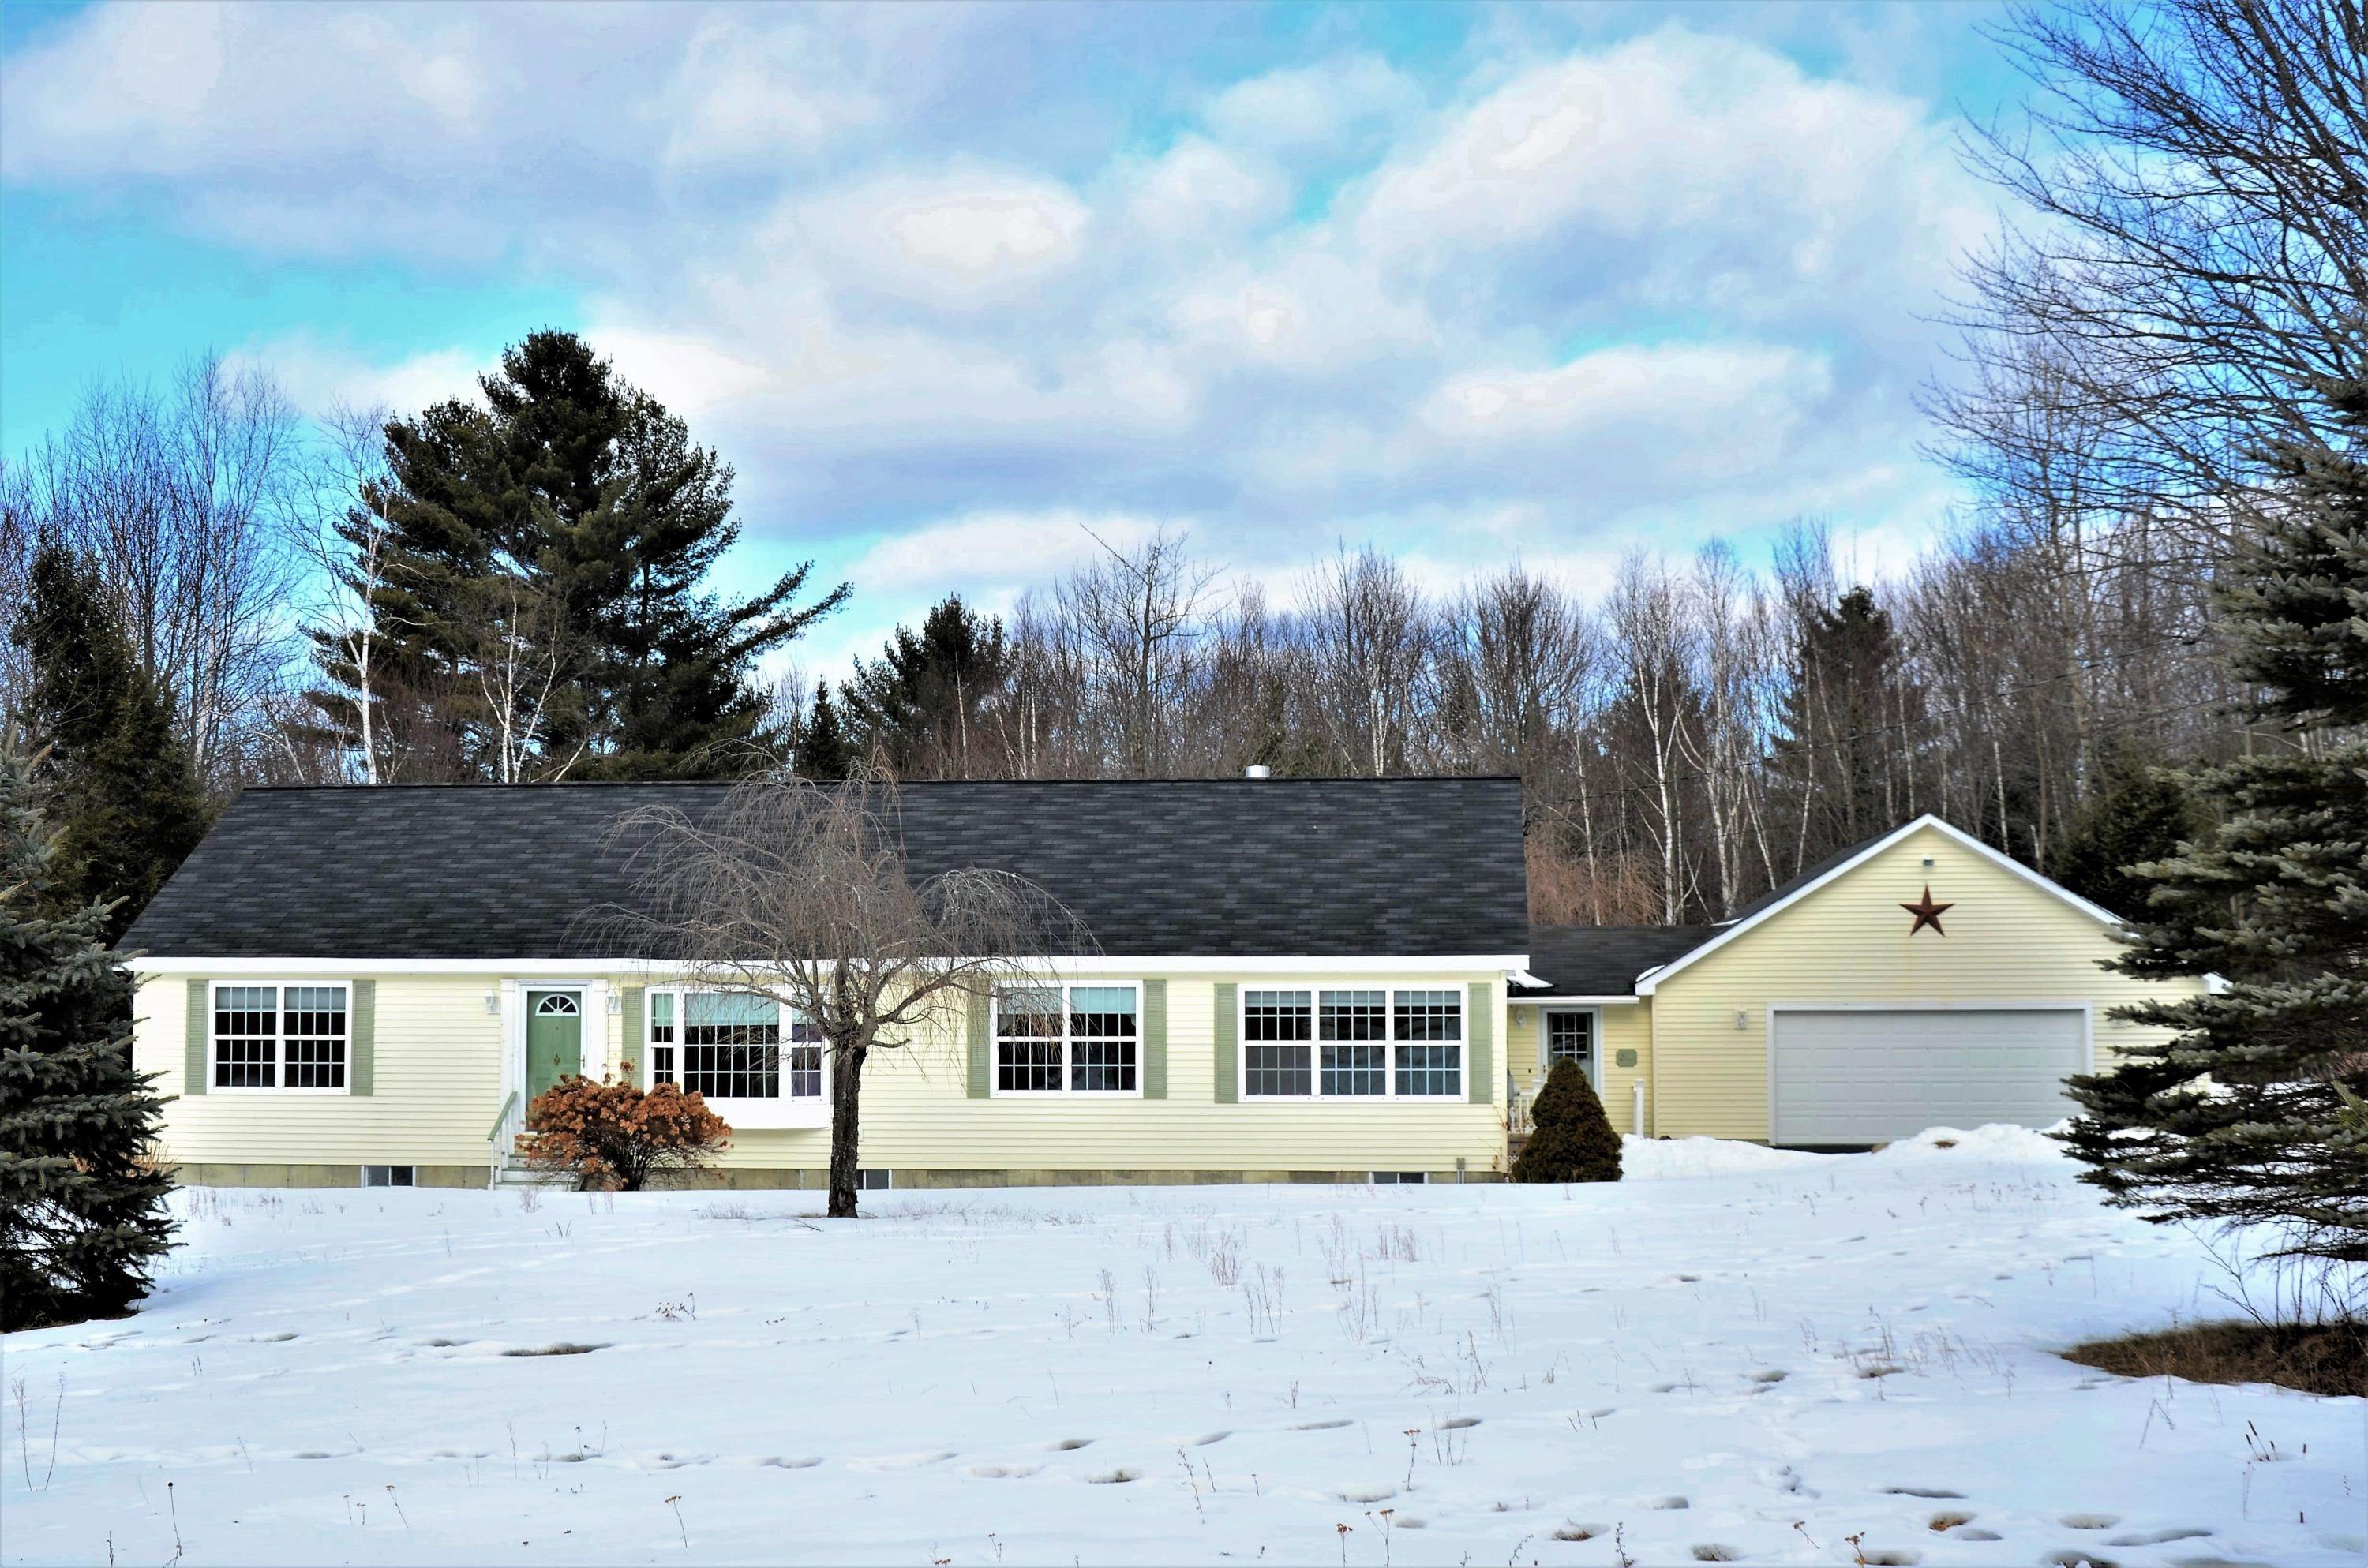 Single Family Homes at Readfield, ME 04355